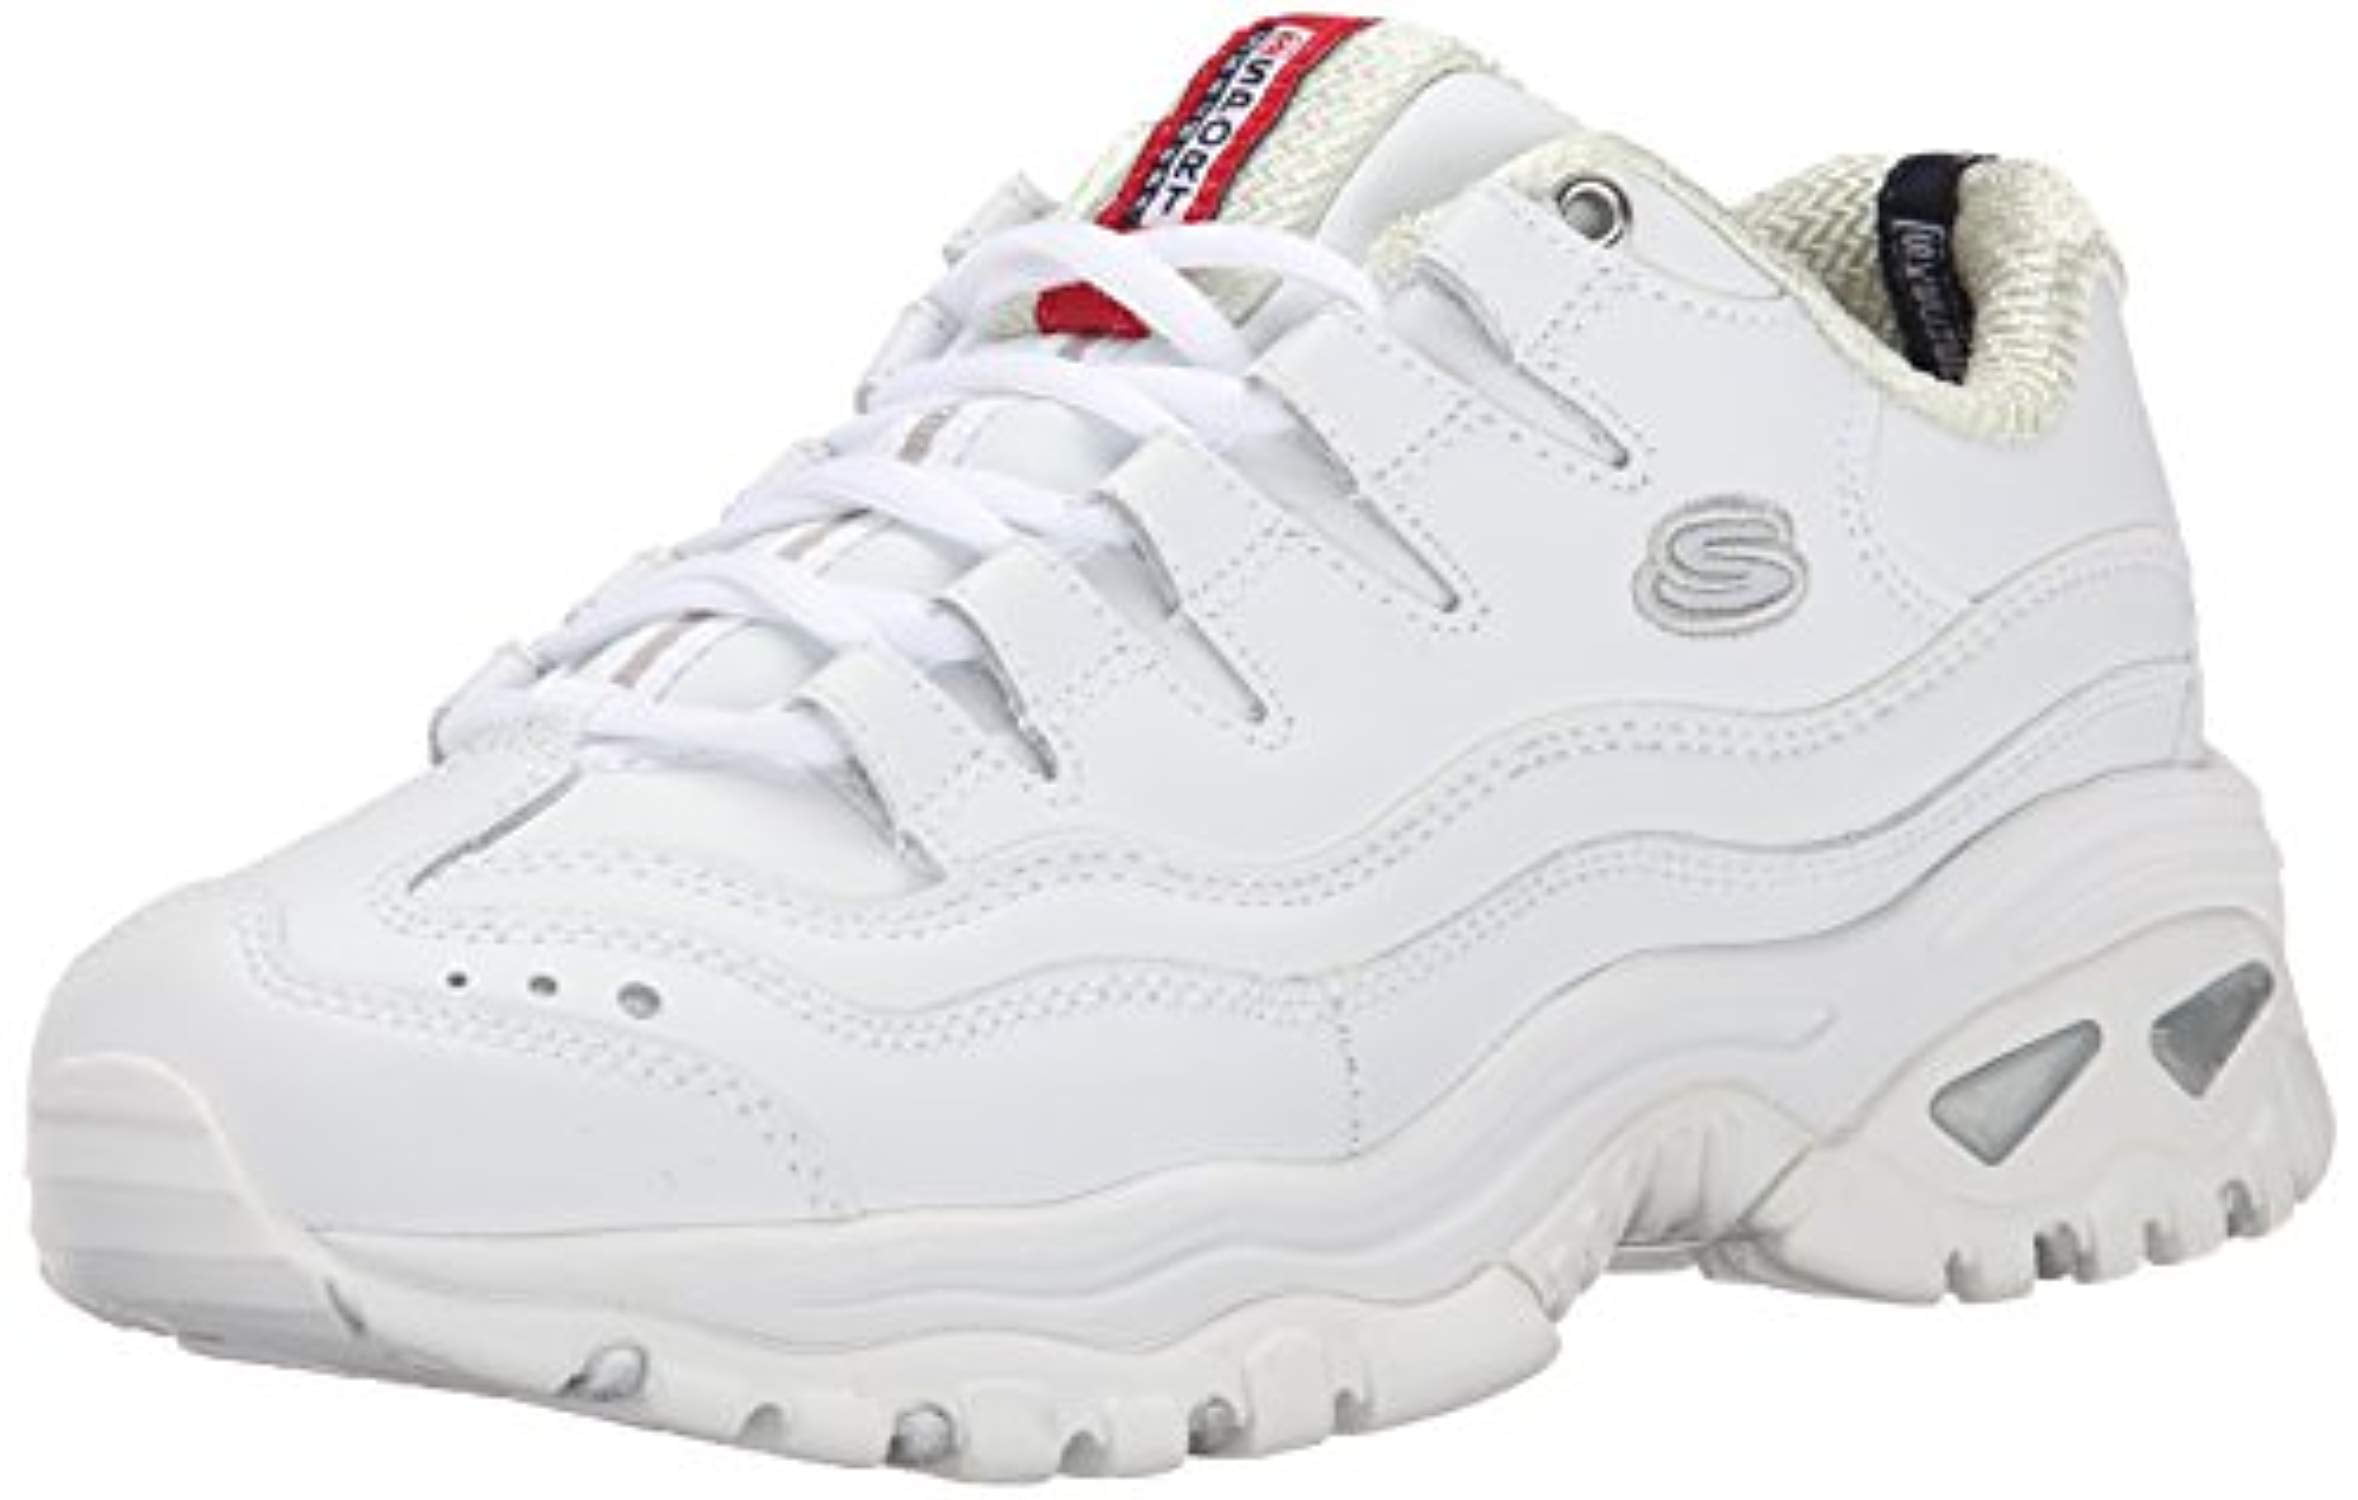 skechers leather white shoes